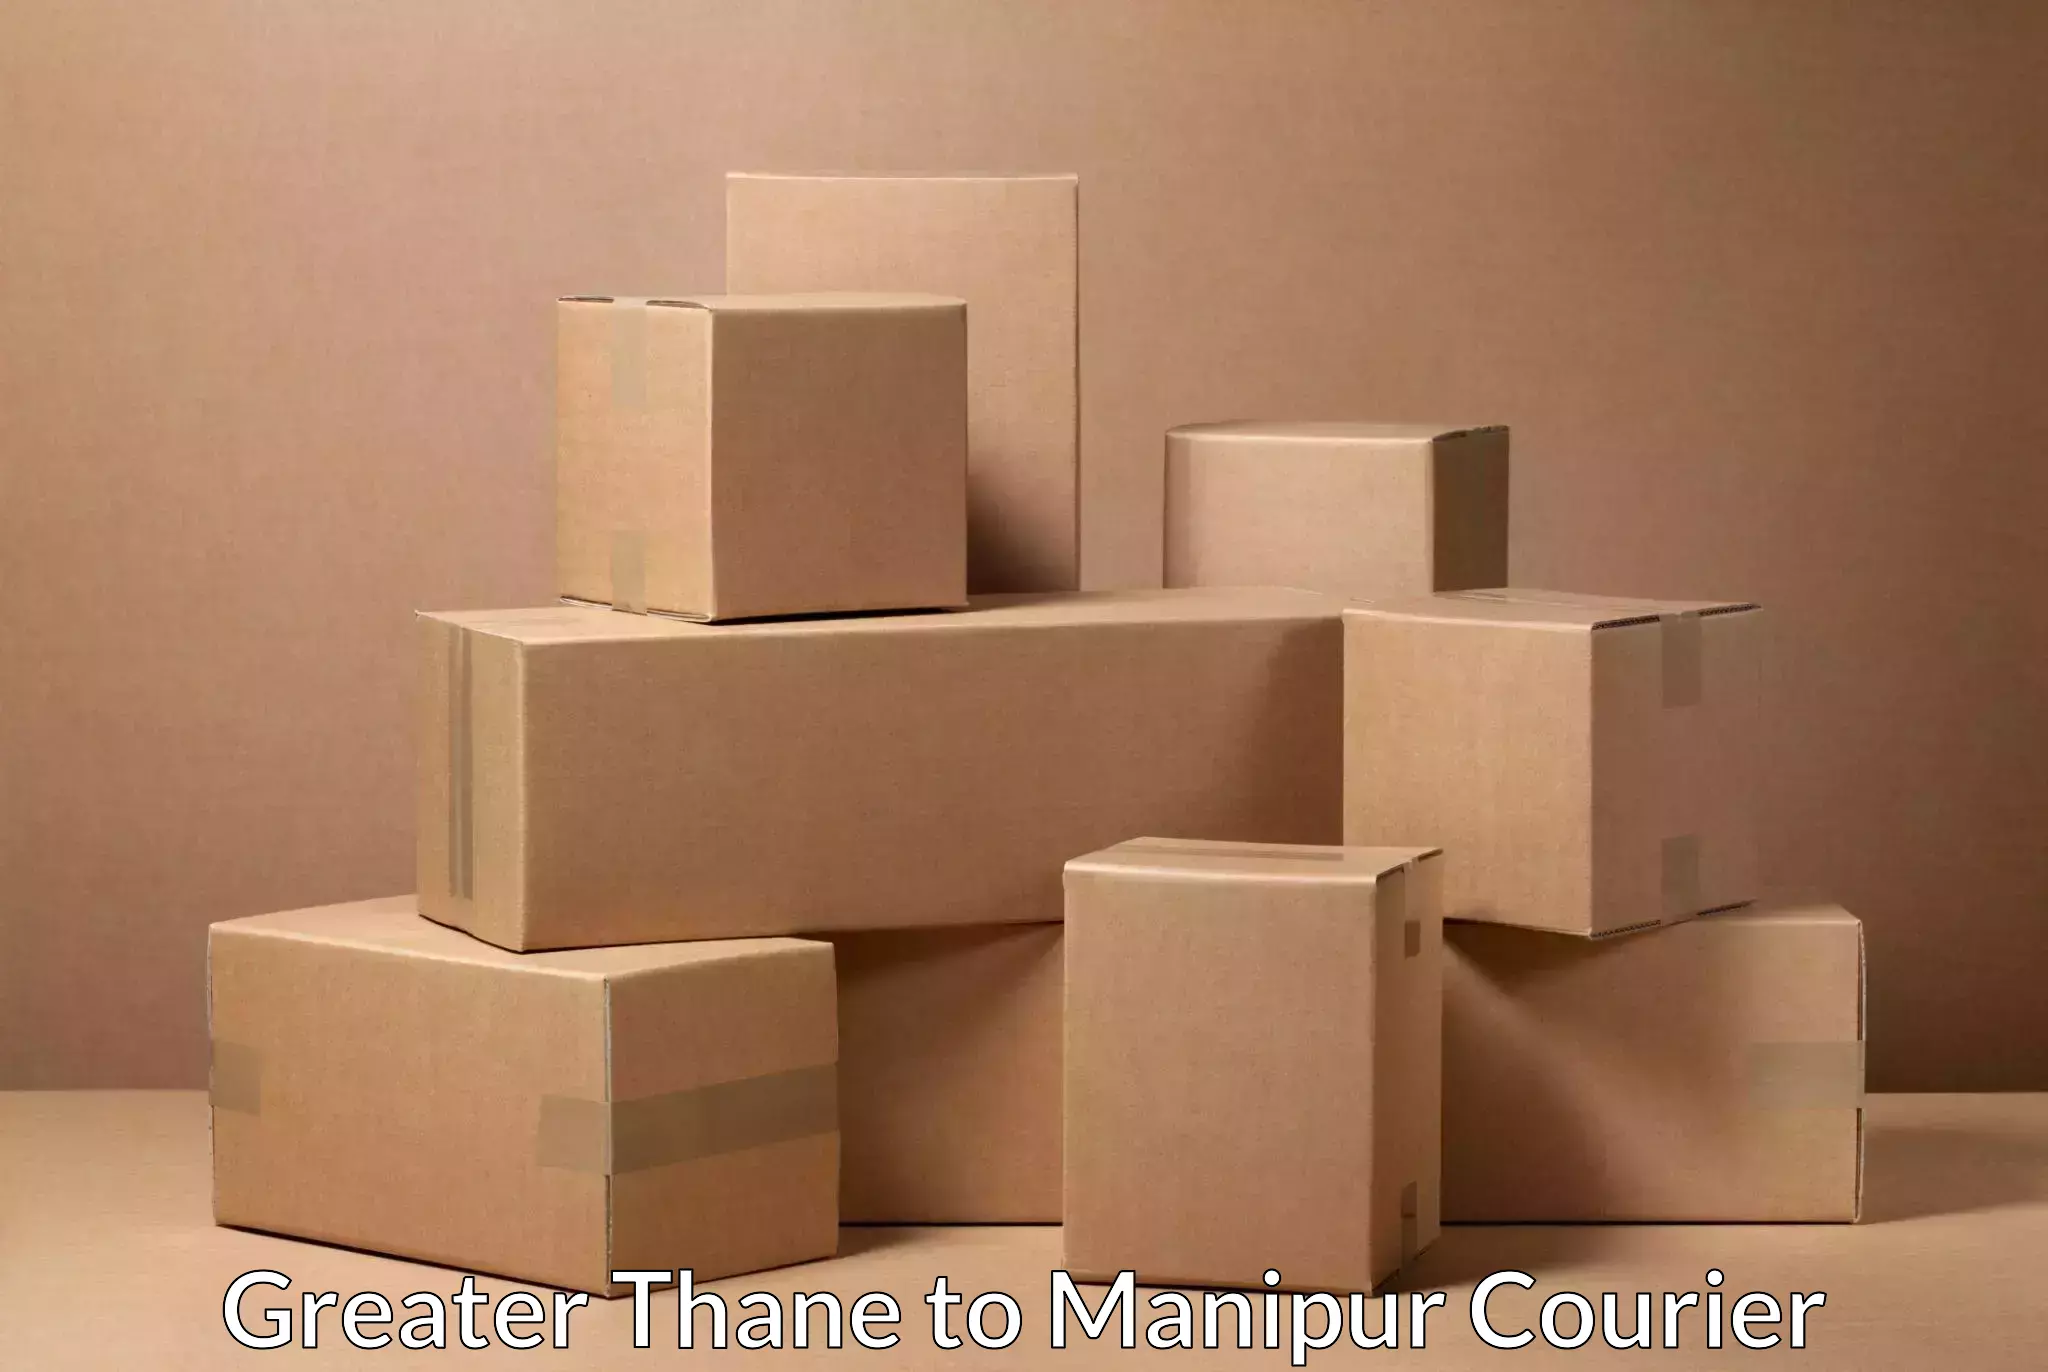 Air courier services Greater Thane to Manipur